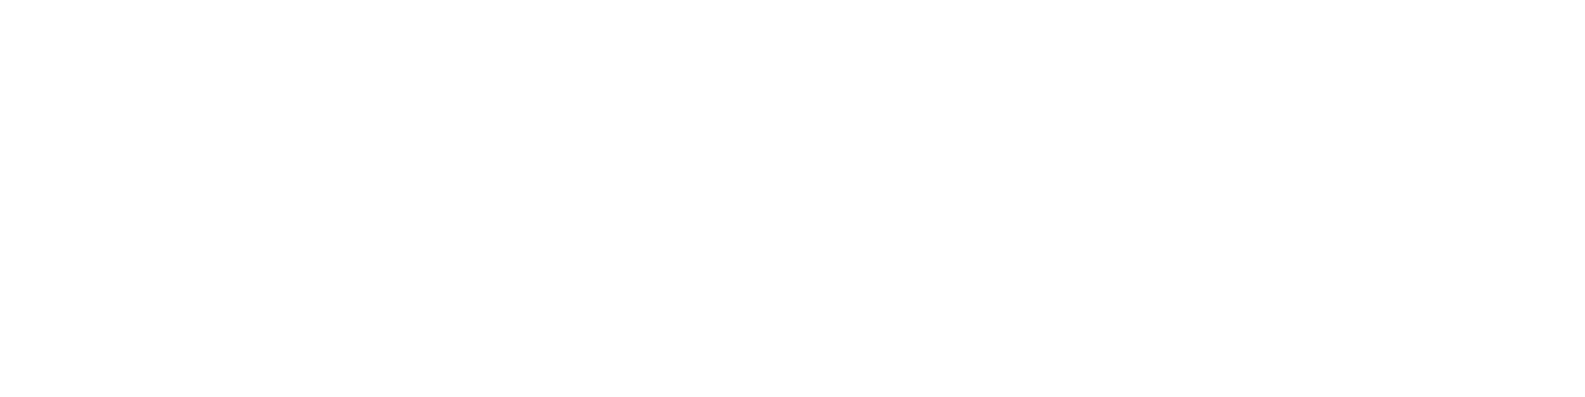 Cerevel Therapeutics logo large for dark backgrounds (transparent PNG)